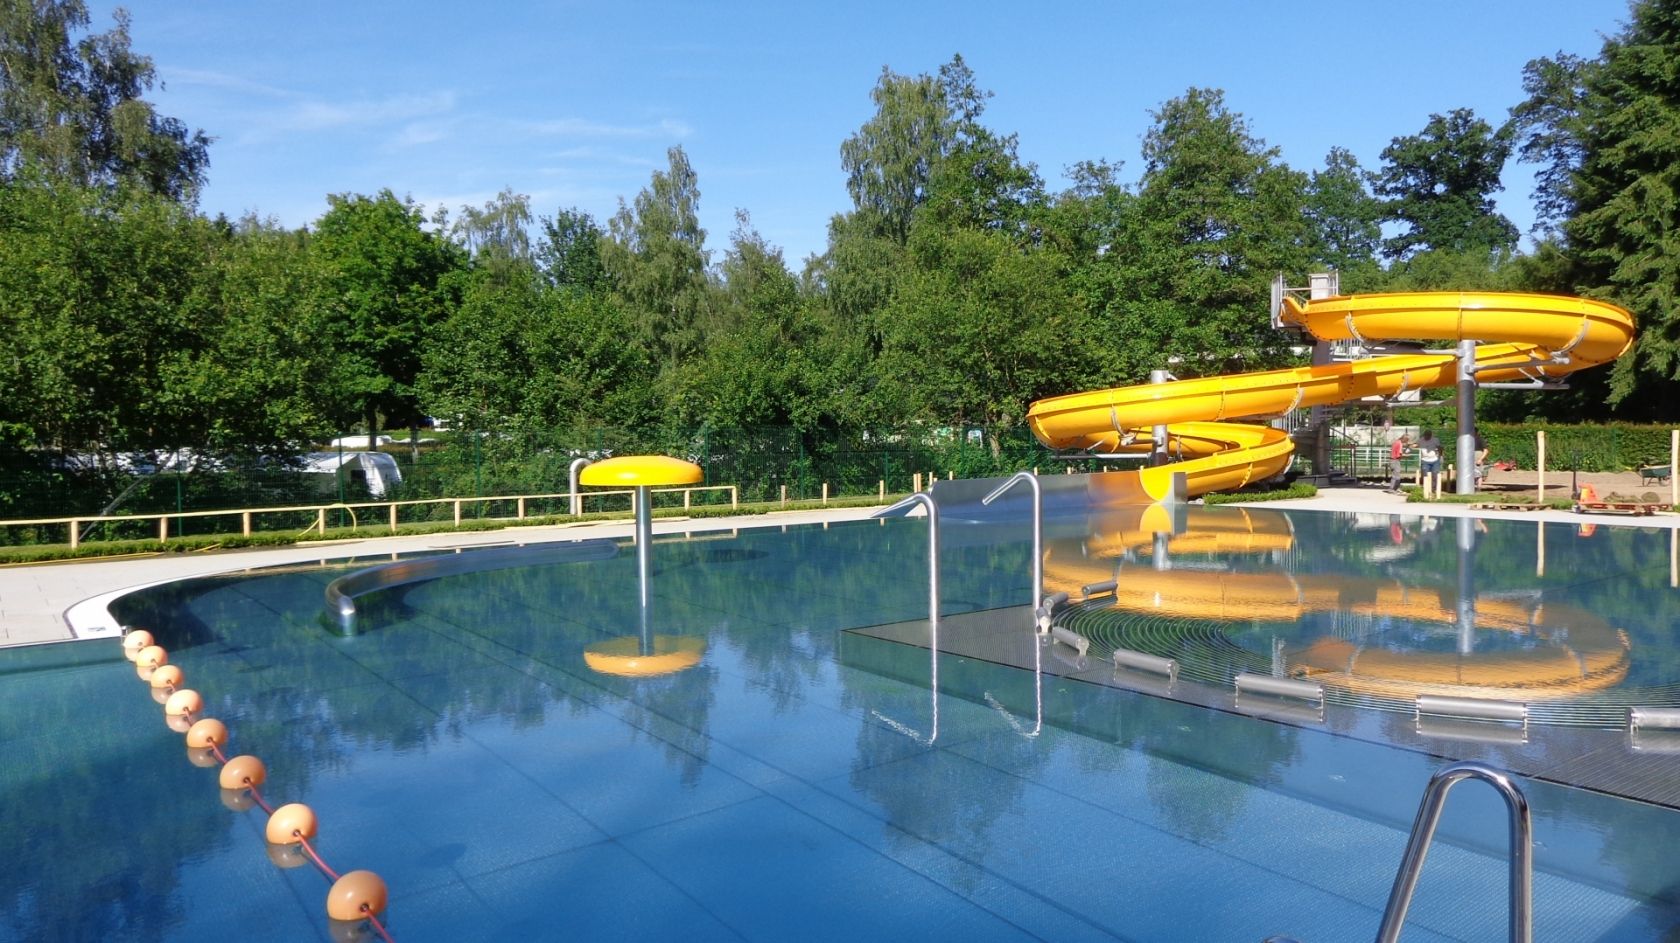 Open-air swimming pool - Troisvierges